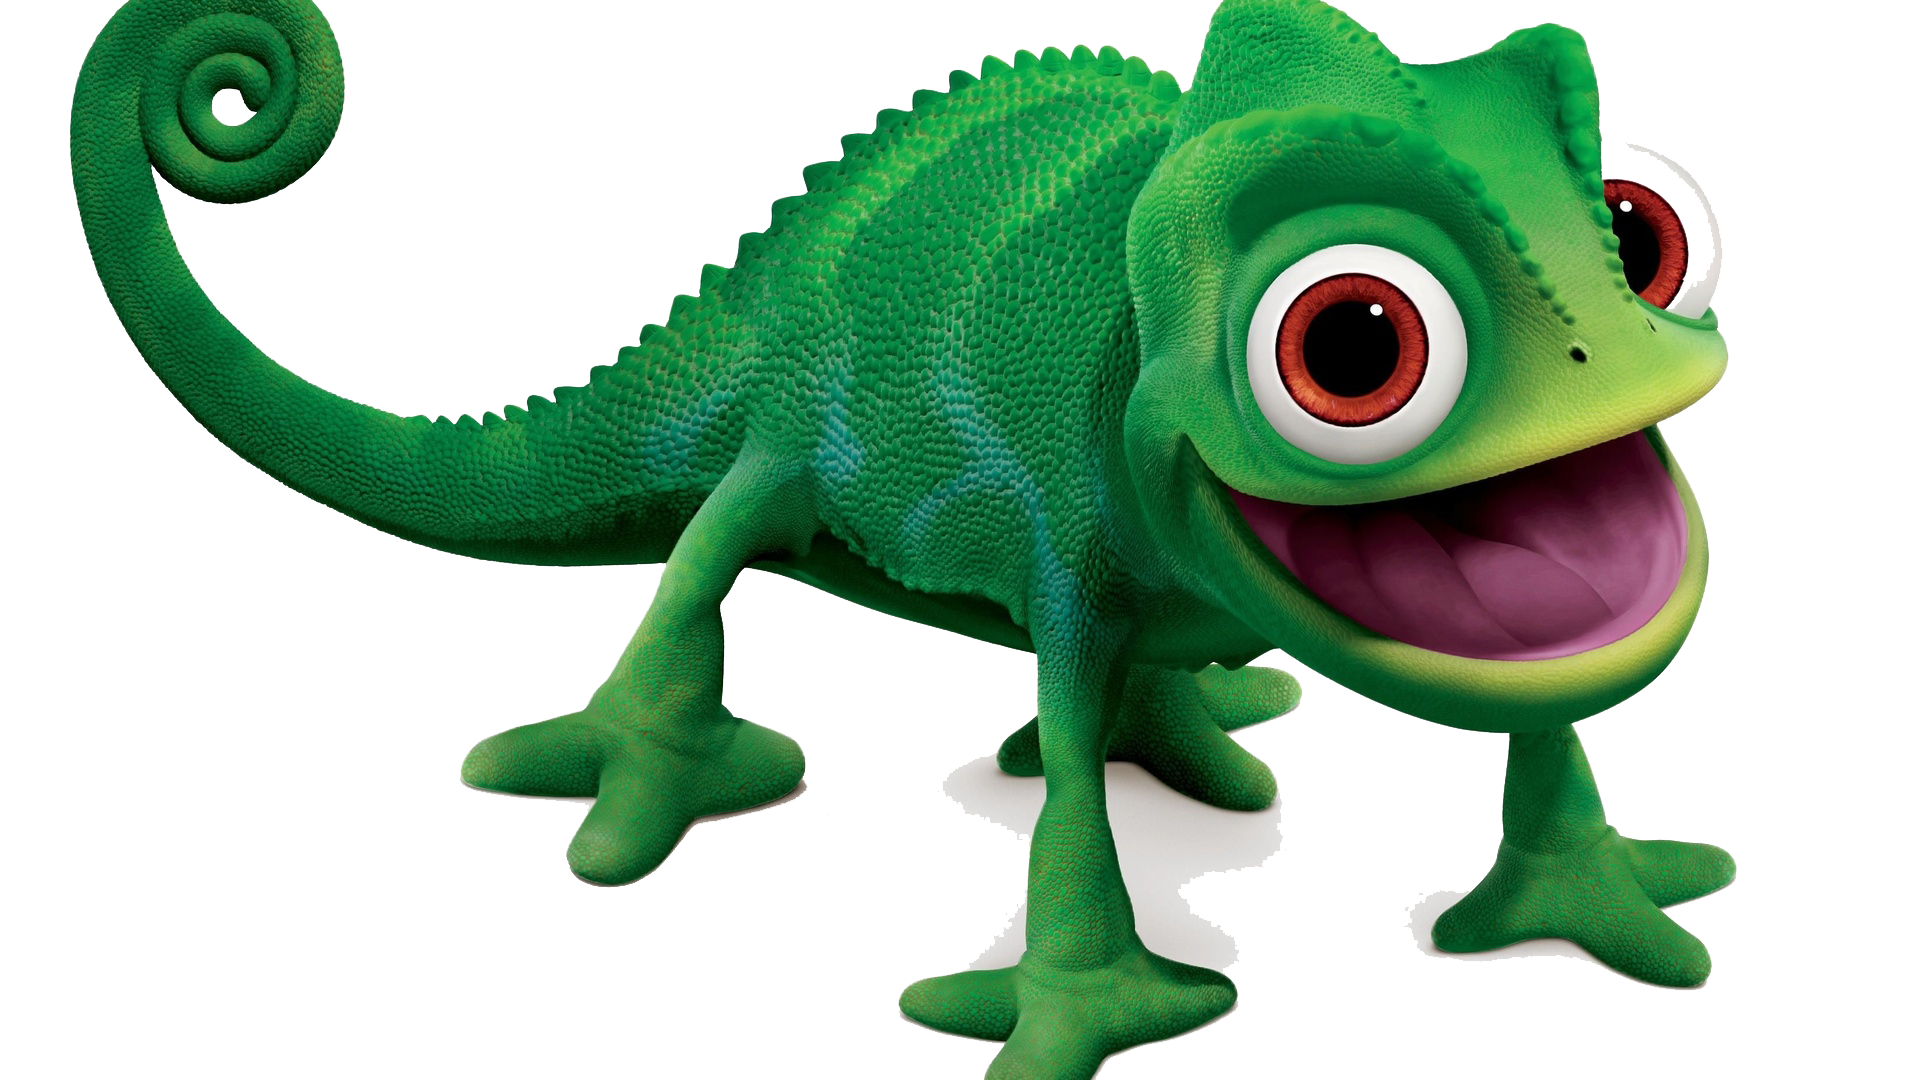 Reptile Chameleon Game Video Rapunzel Tangled The PNG Image